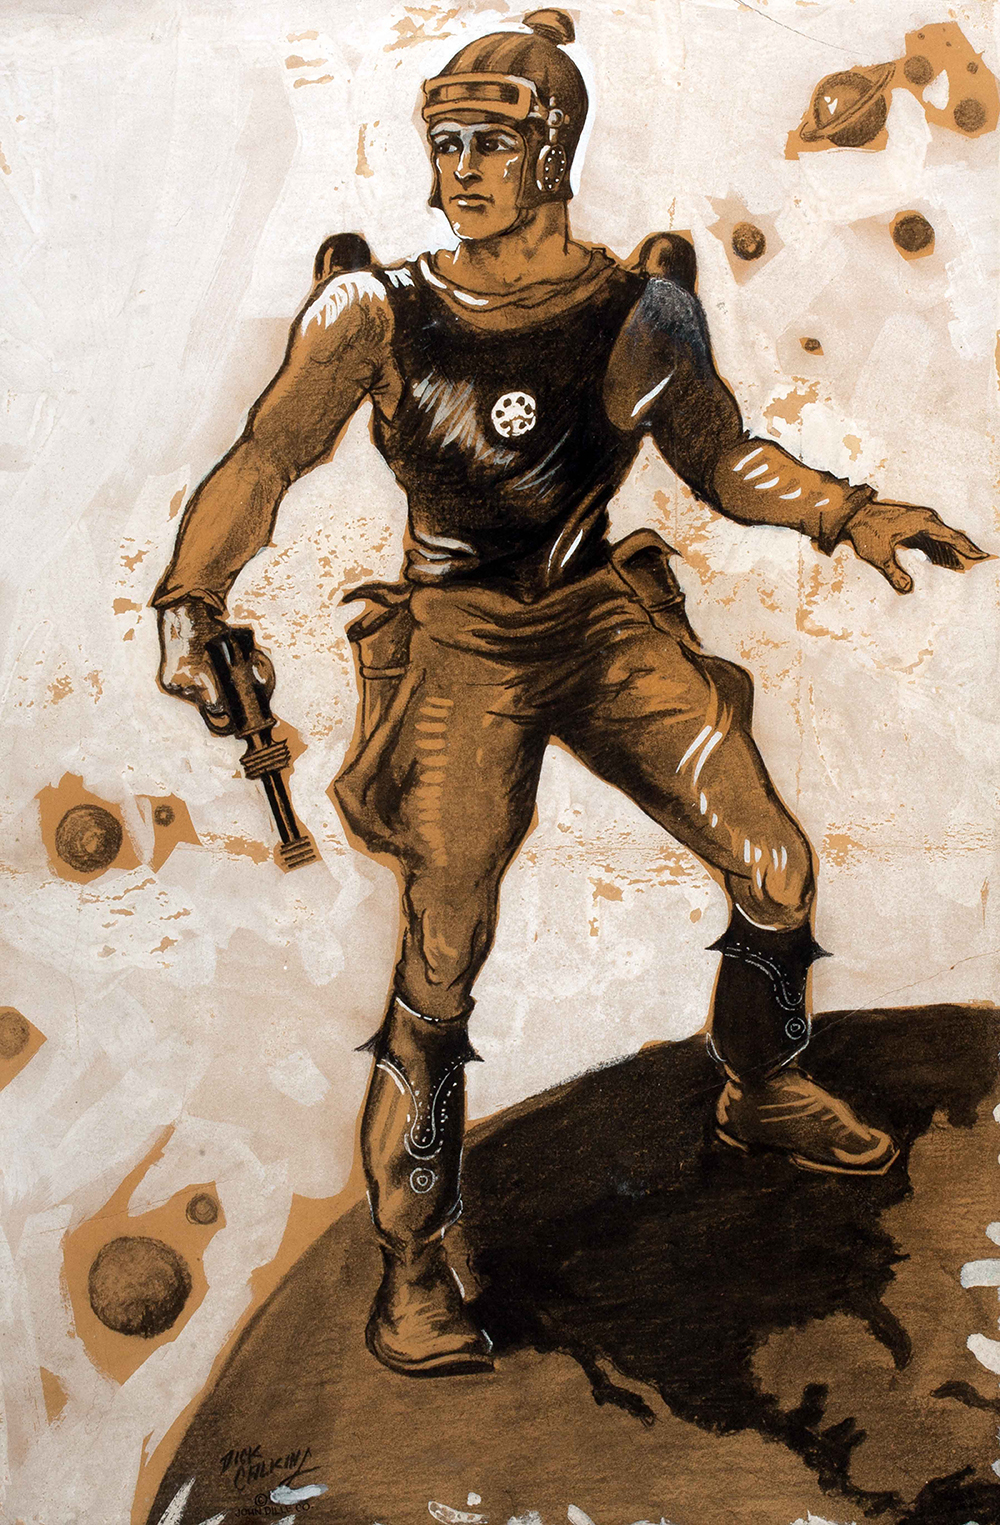 Richard Calkins, "Buck Rogers in the 25th Century, National Newspaper Service, Chicago: 1936," 1936, Gouache and charcoal on paper, 26 1/2 x 18 1/4 in., The Robert Lesser Collection of Pulp Art, 2009.22.78LIC